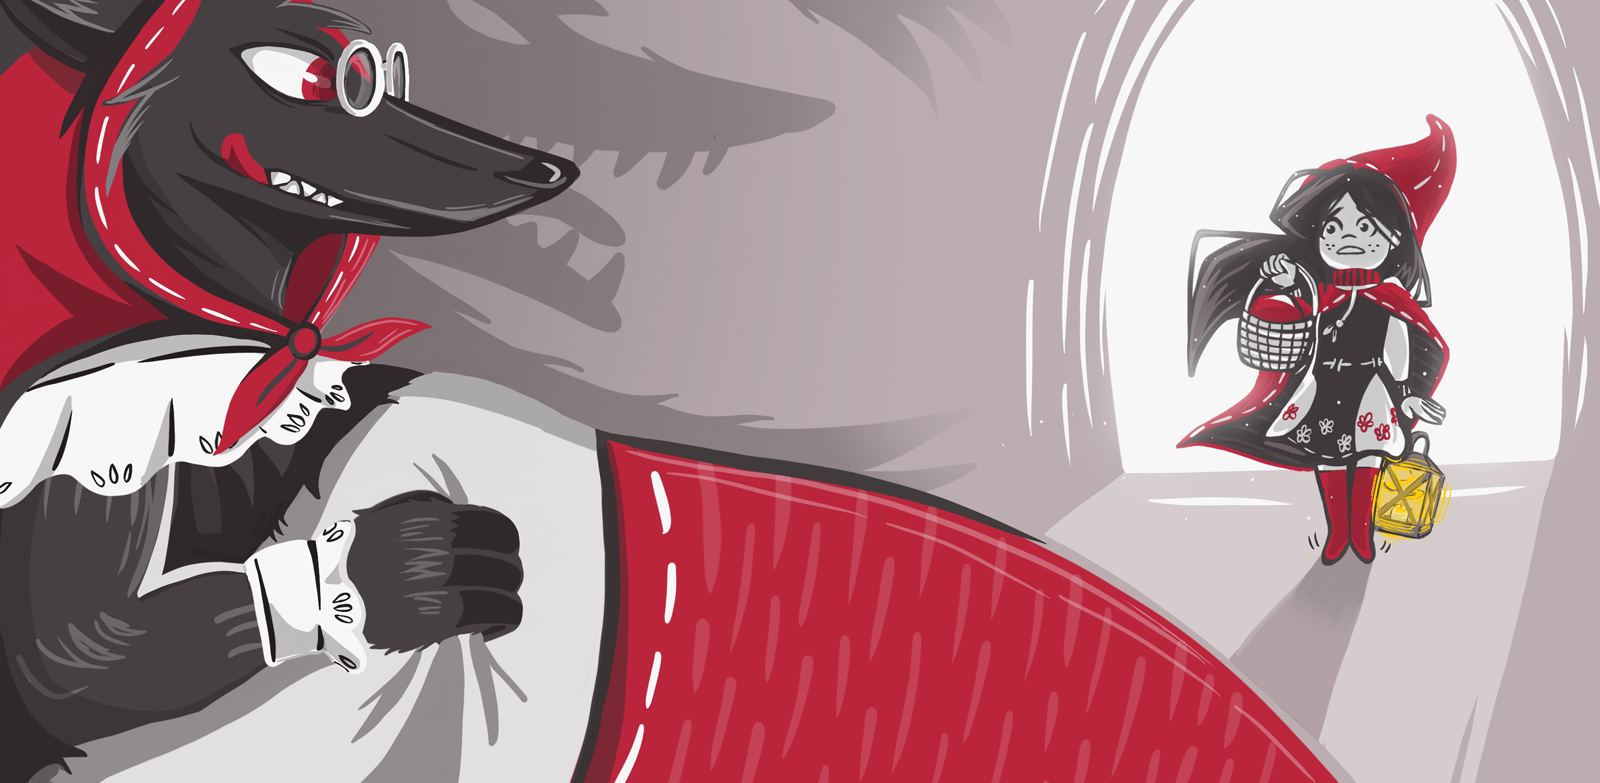 Wolf dressed in a hood in bed glares hungrily at little red riding hood